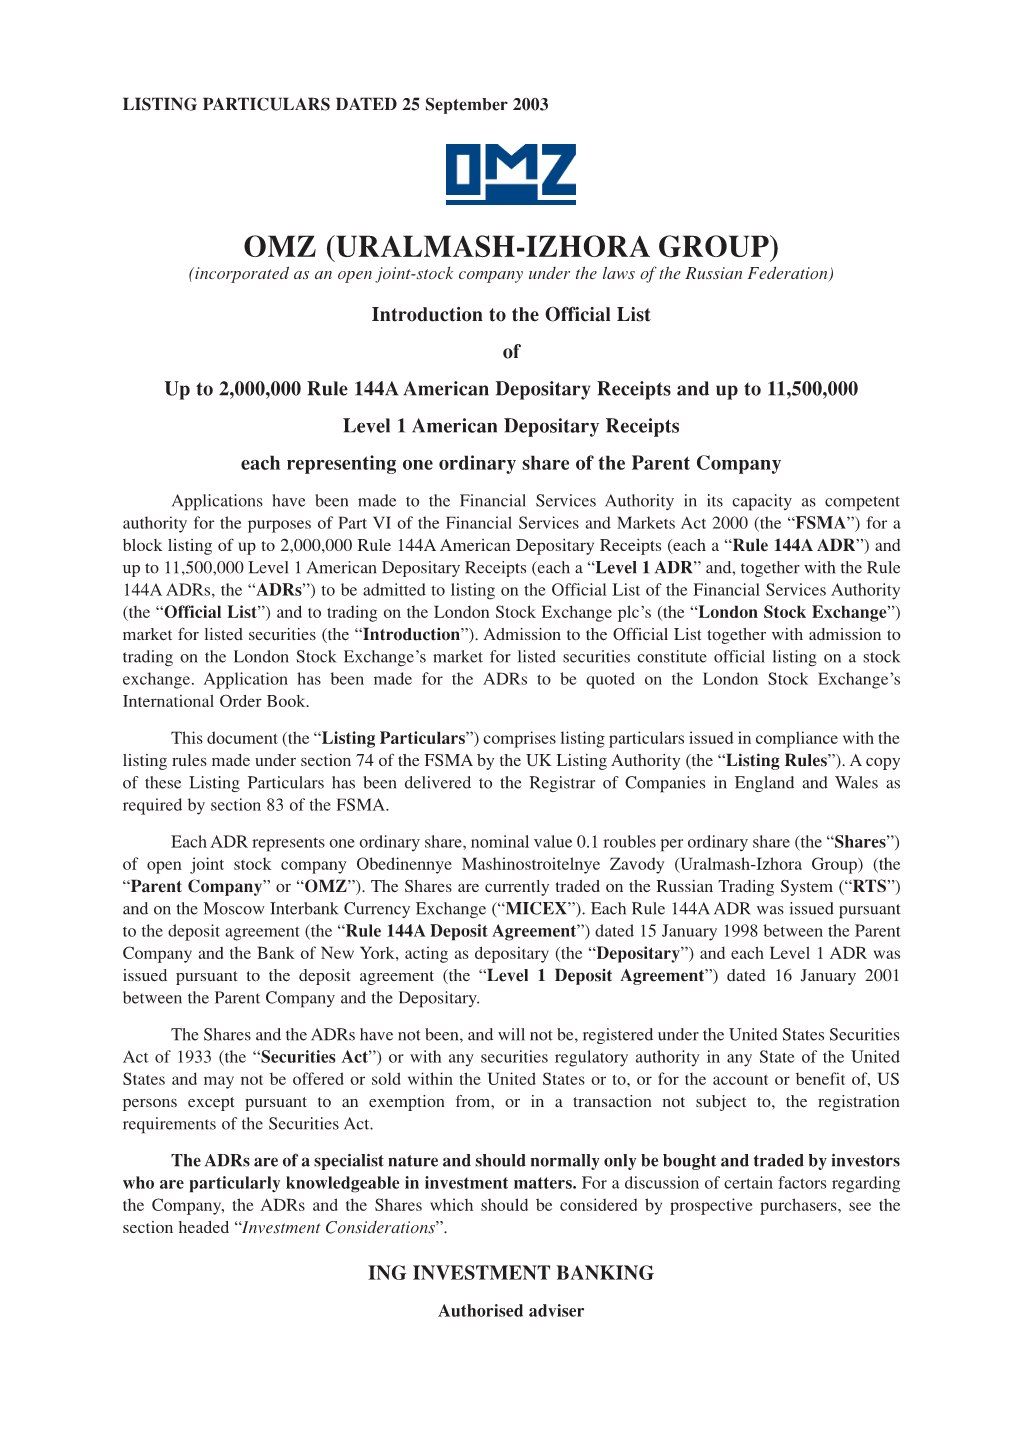 OMZ (URALMASH-IZHORA GROUP) (Incorporated As an Open Joint-Stock Company Under the Laws of the Russian Federation)